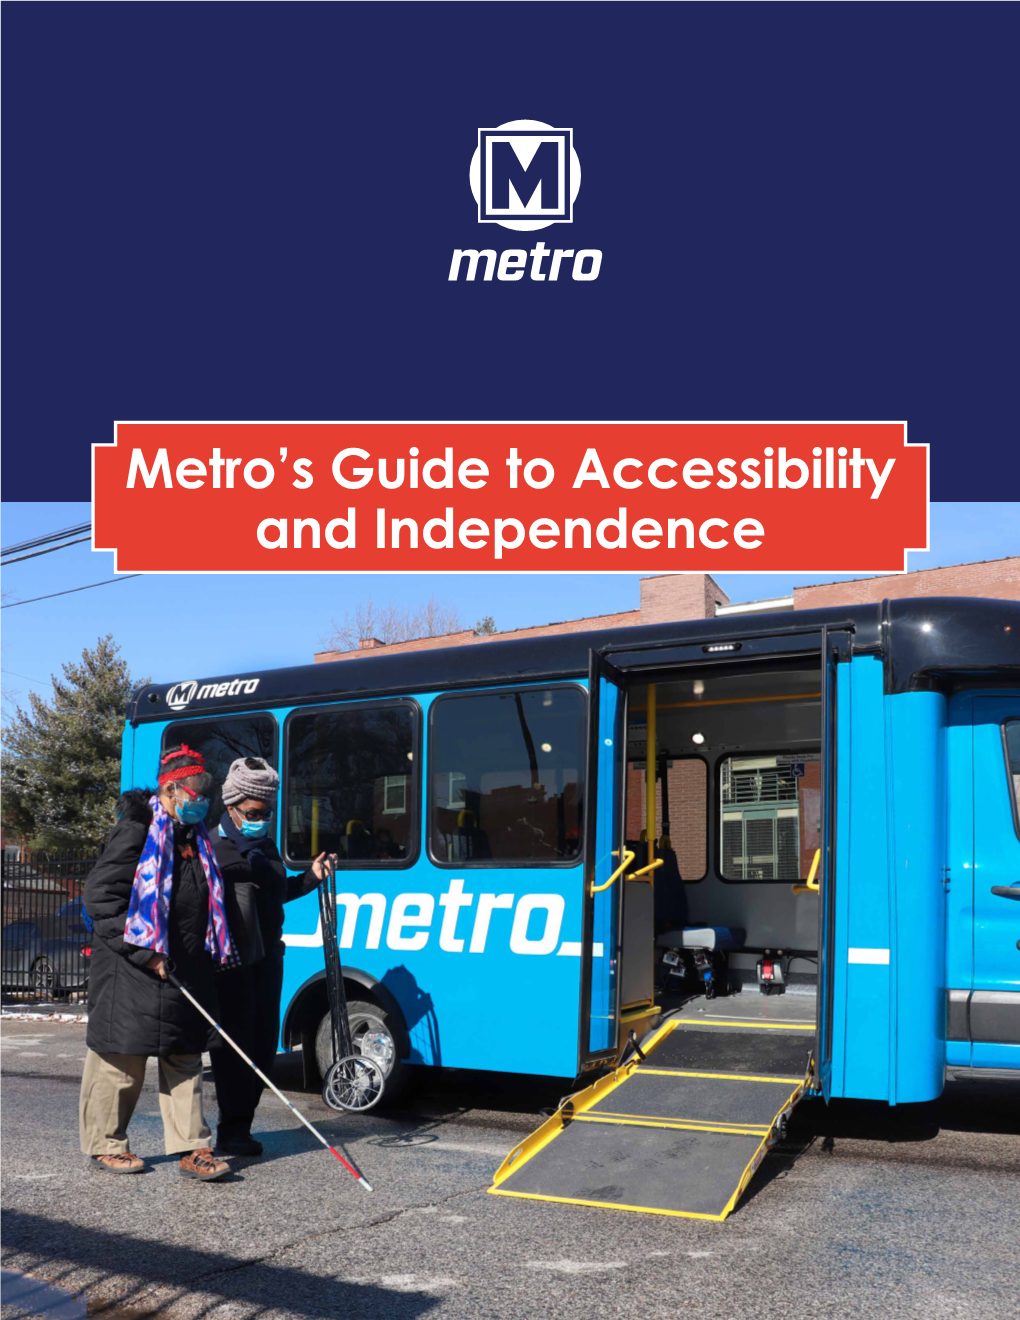 Metro's Guide to Accessibility and Independence